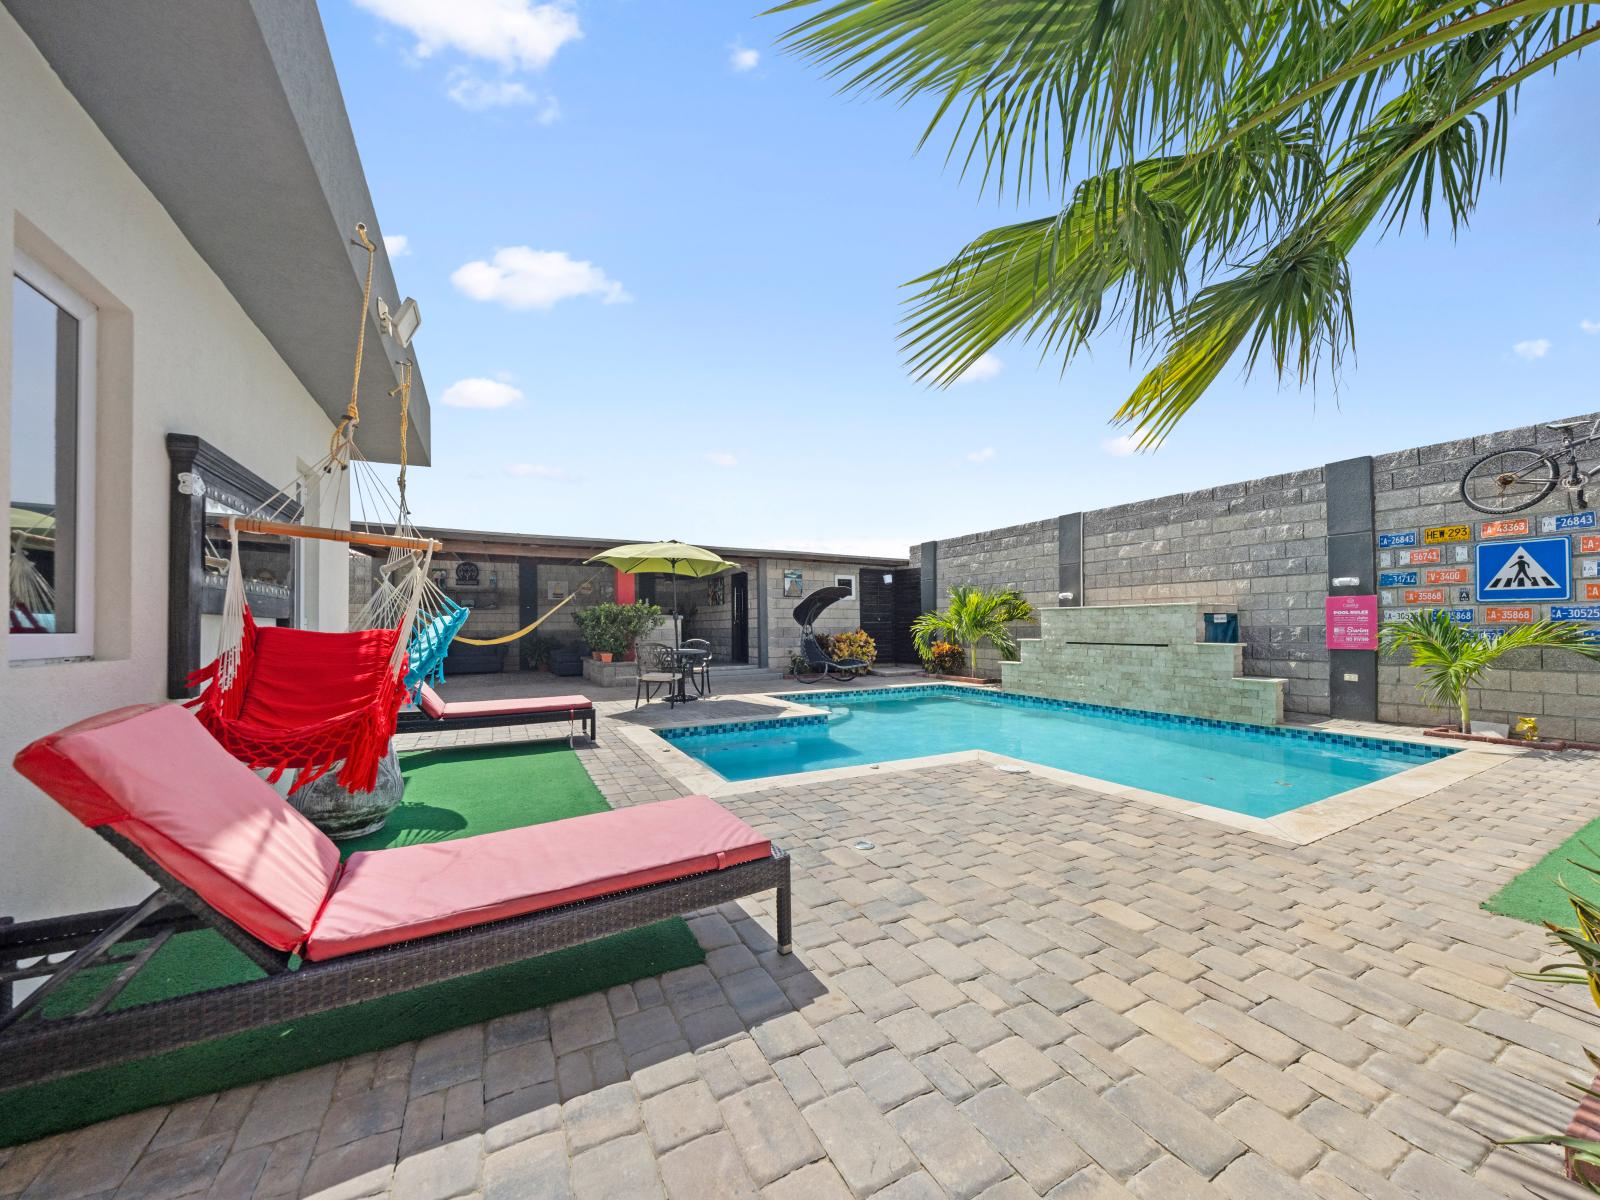 Immerse yourself in serenity with this inviting pool of the home in Aruba - A peaceful atmosphere where you can relax and create unforgettable memories - Serene escape where you can unwind and rejuvenate in style with plenty of seating